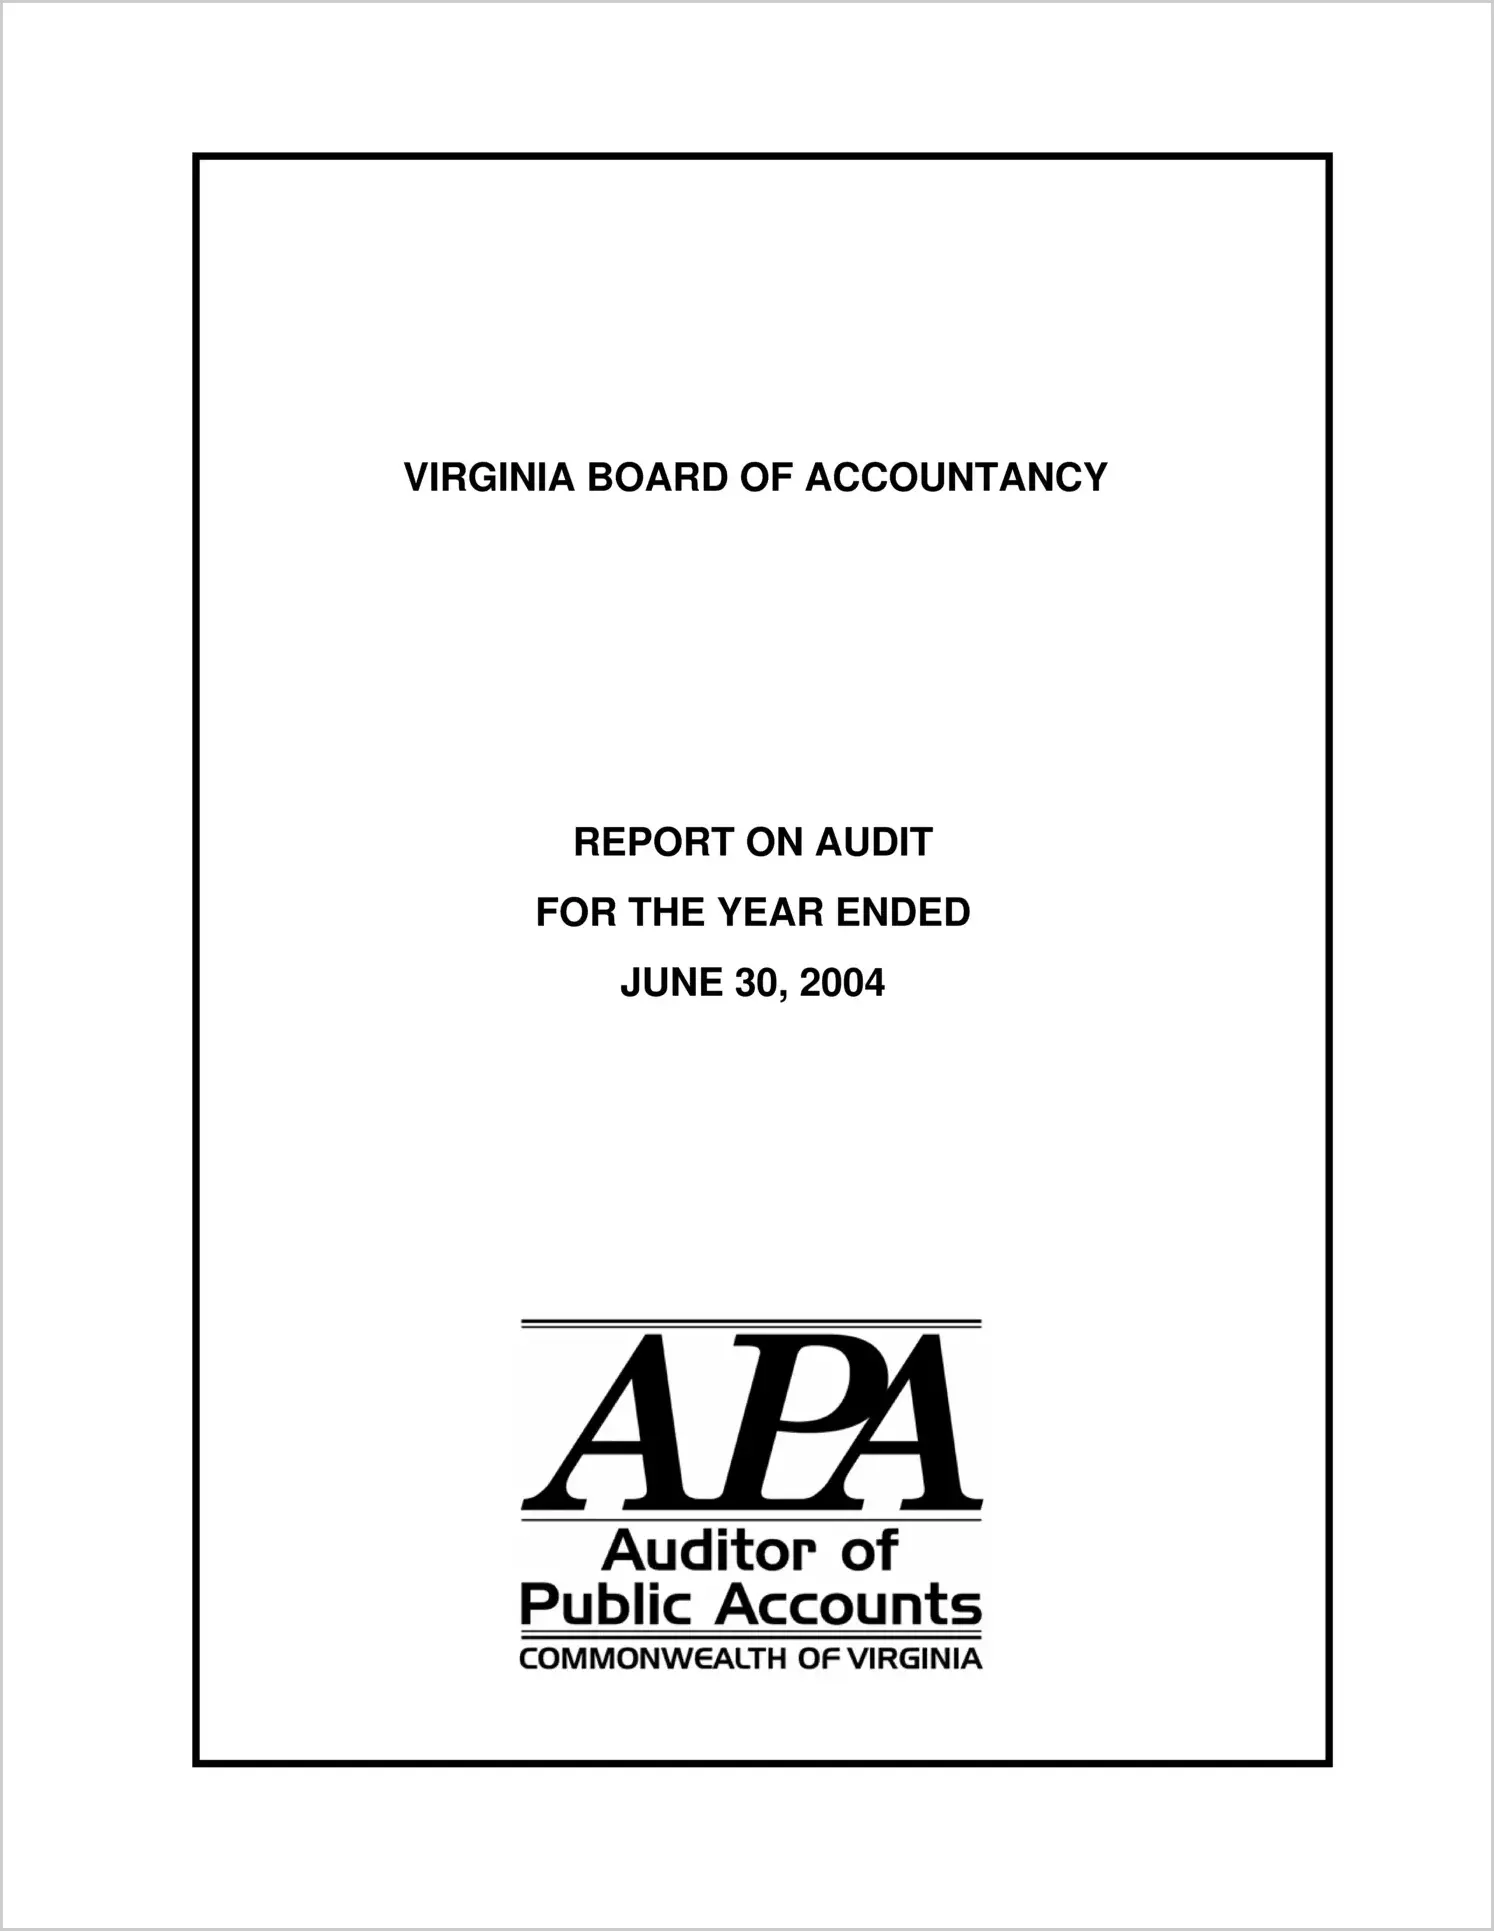 Virginia Board of Accountancy for the year ended June 30, 2004